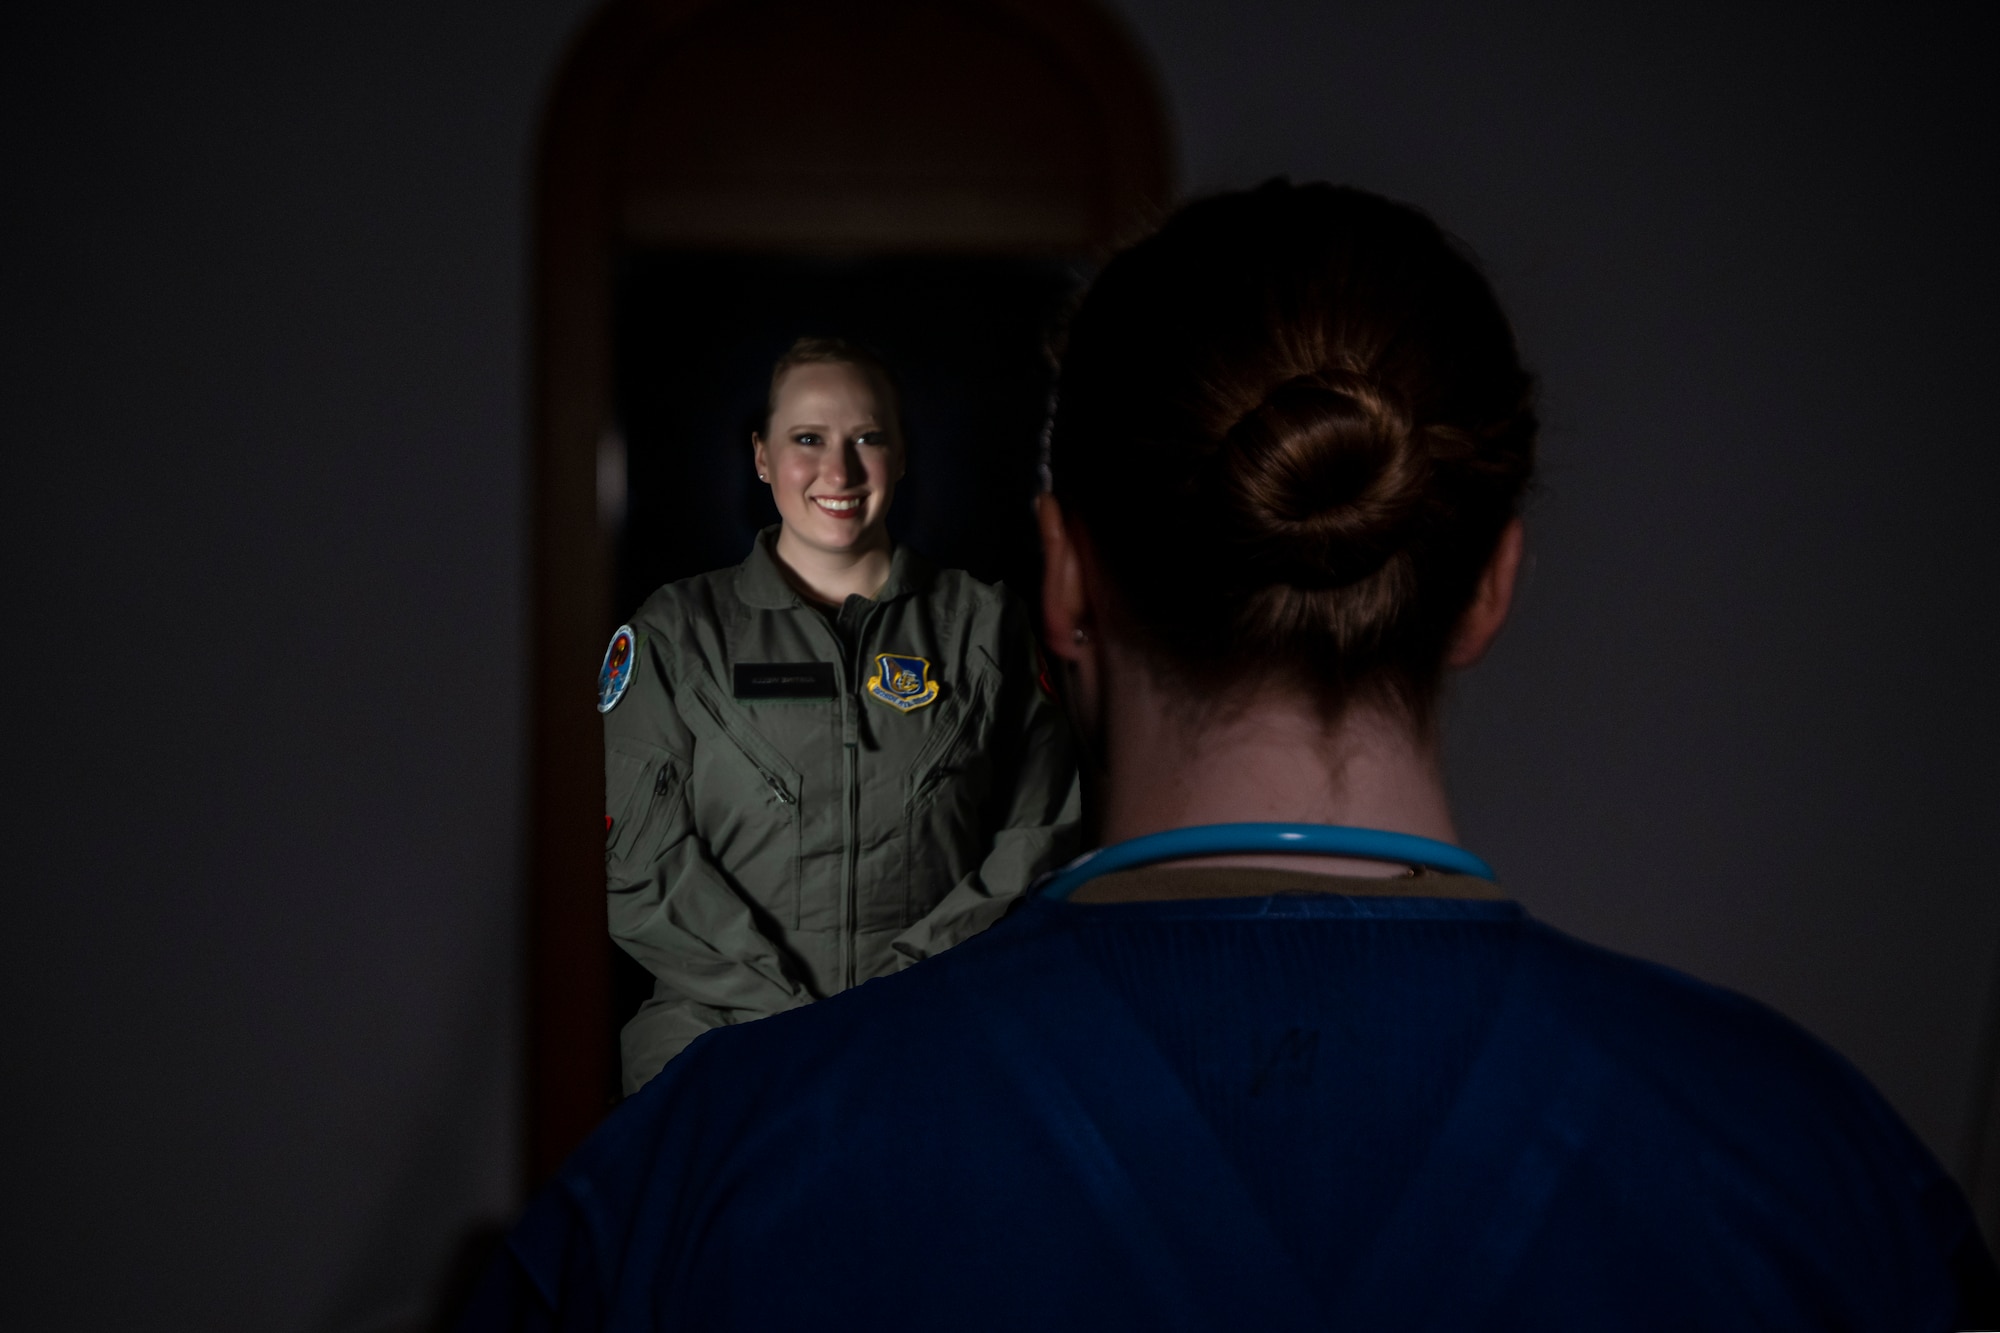 U.S. Air Force Maj. Justine Wells, 35th Surgical Operations Squadron labor and delivery element leader, poses for a photo at Misawa Air Base, Japan, Oct. 20, 2022.